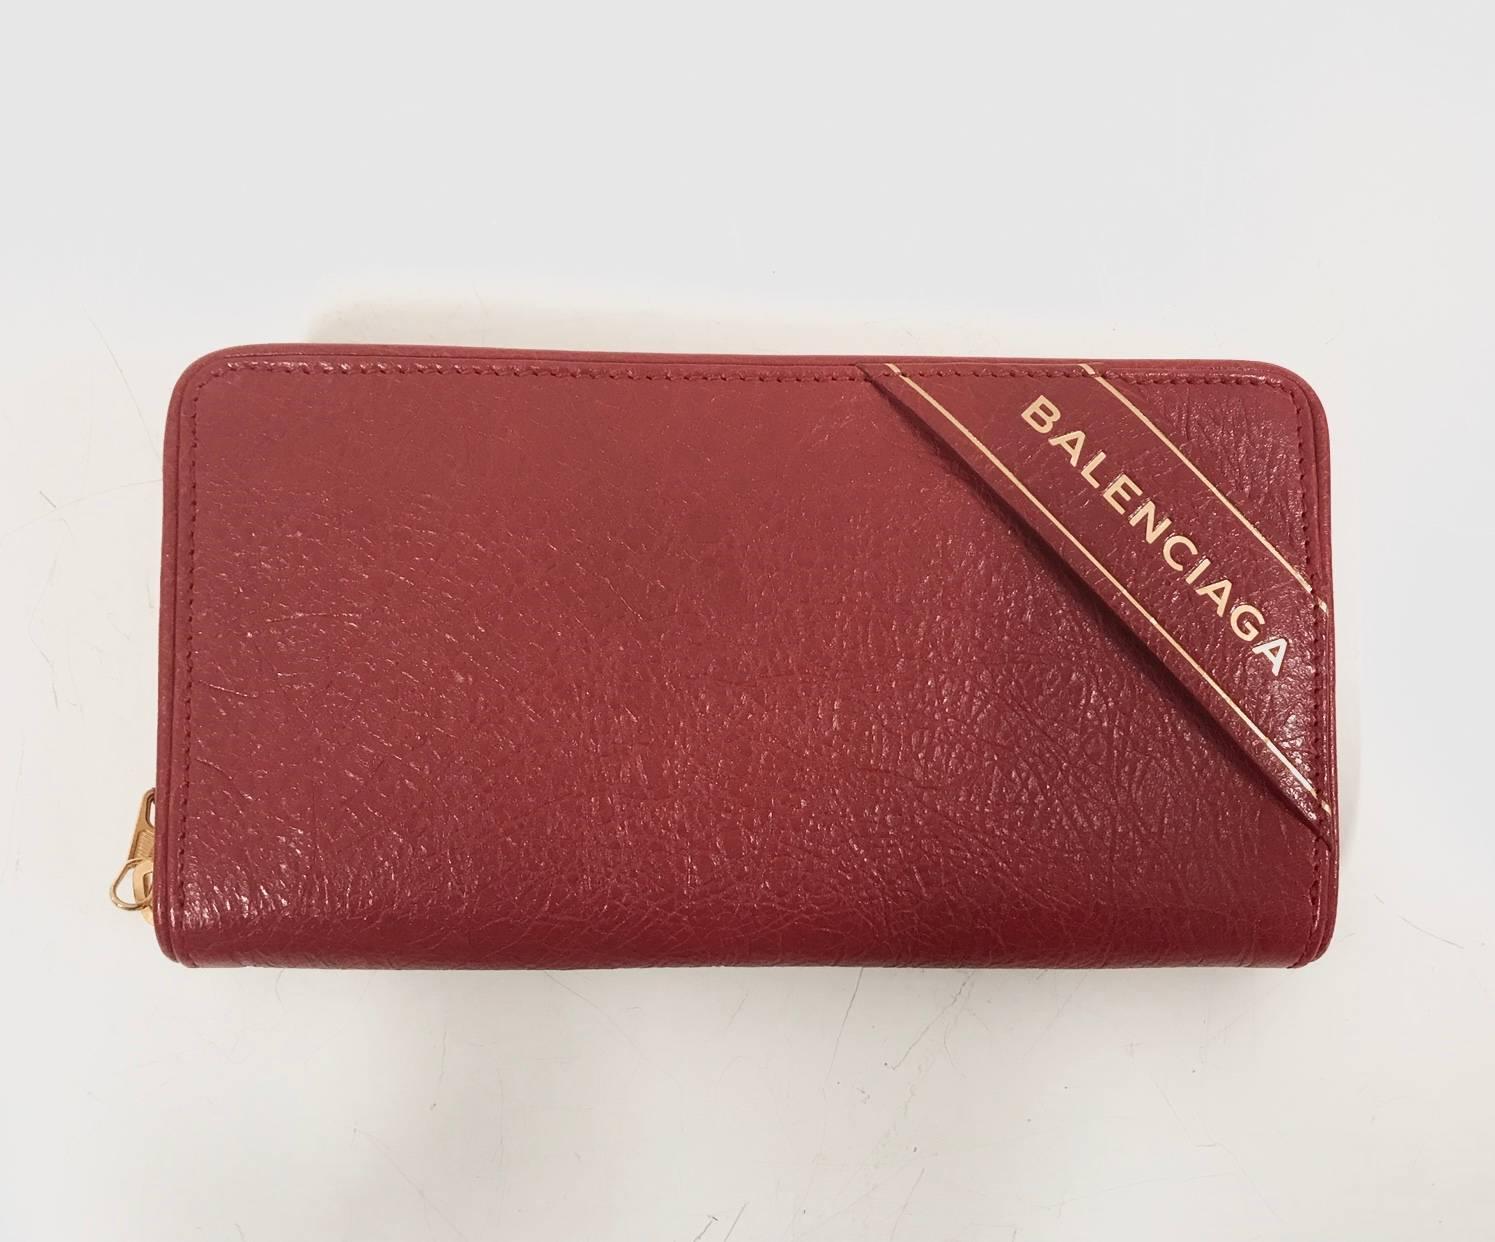 Balenciaga wallet 

Leather material
Red color with finishes and golden logo
FW17 season
New condition
Packaging original box
Measurements Width 20 cm X height 10 cm

Fast delivery DHL EXPRESS